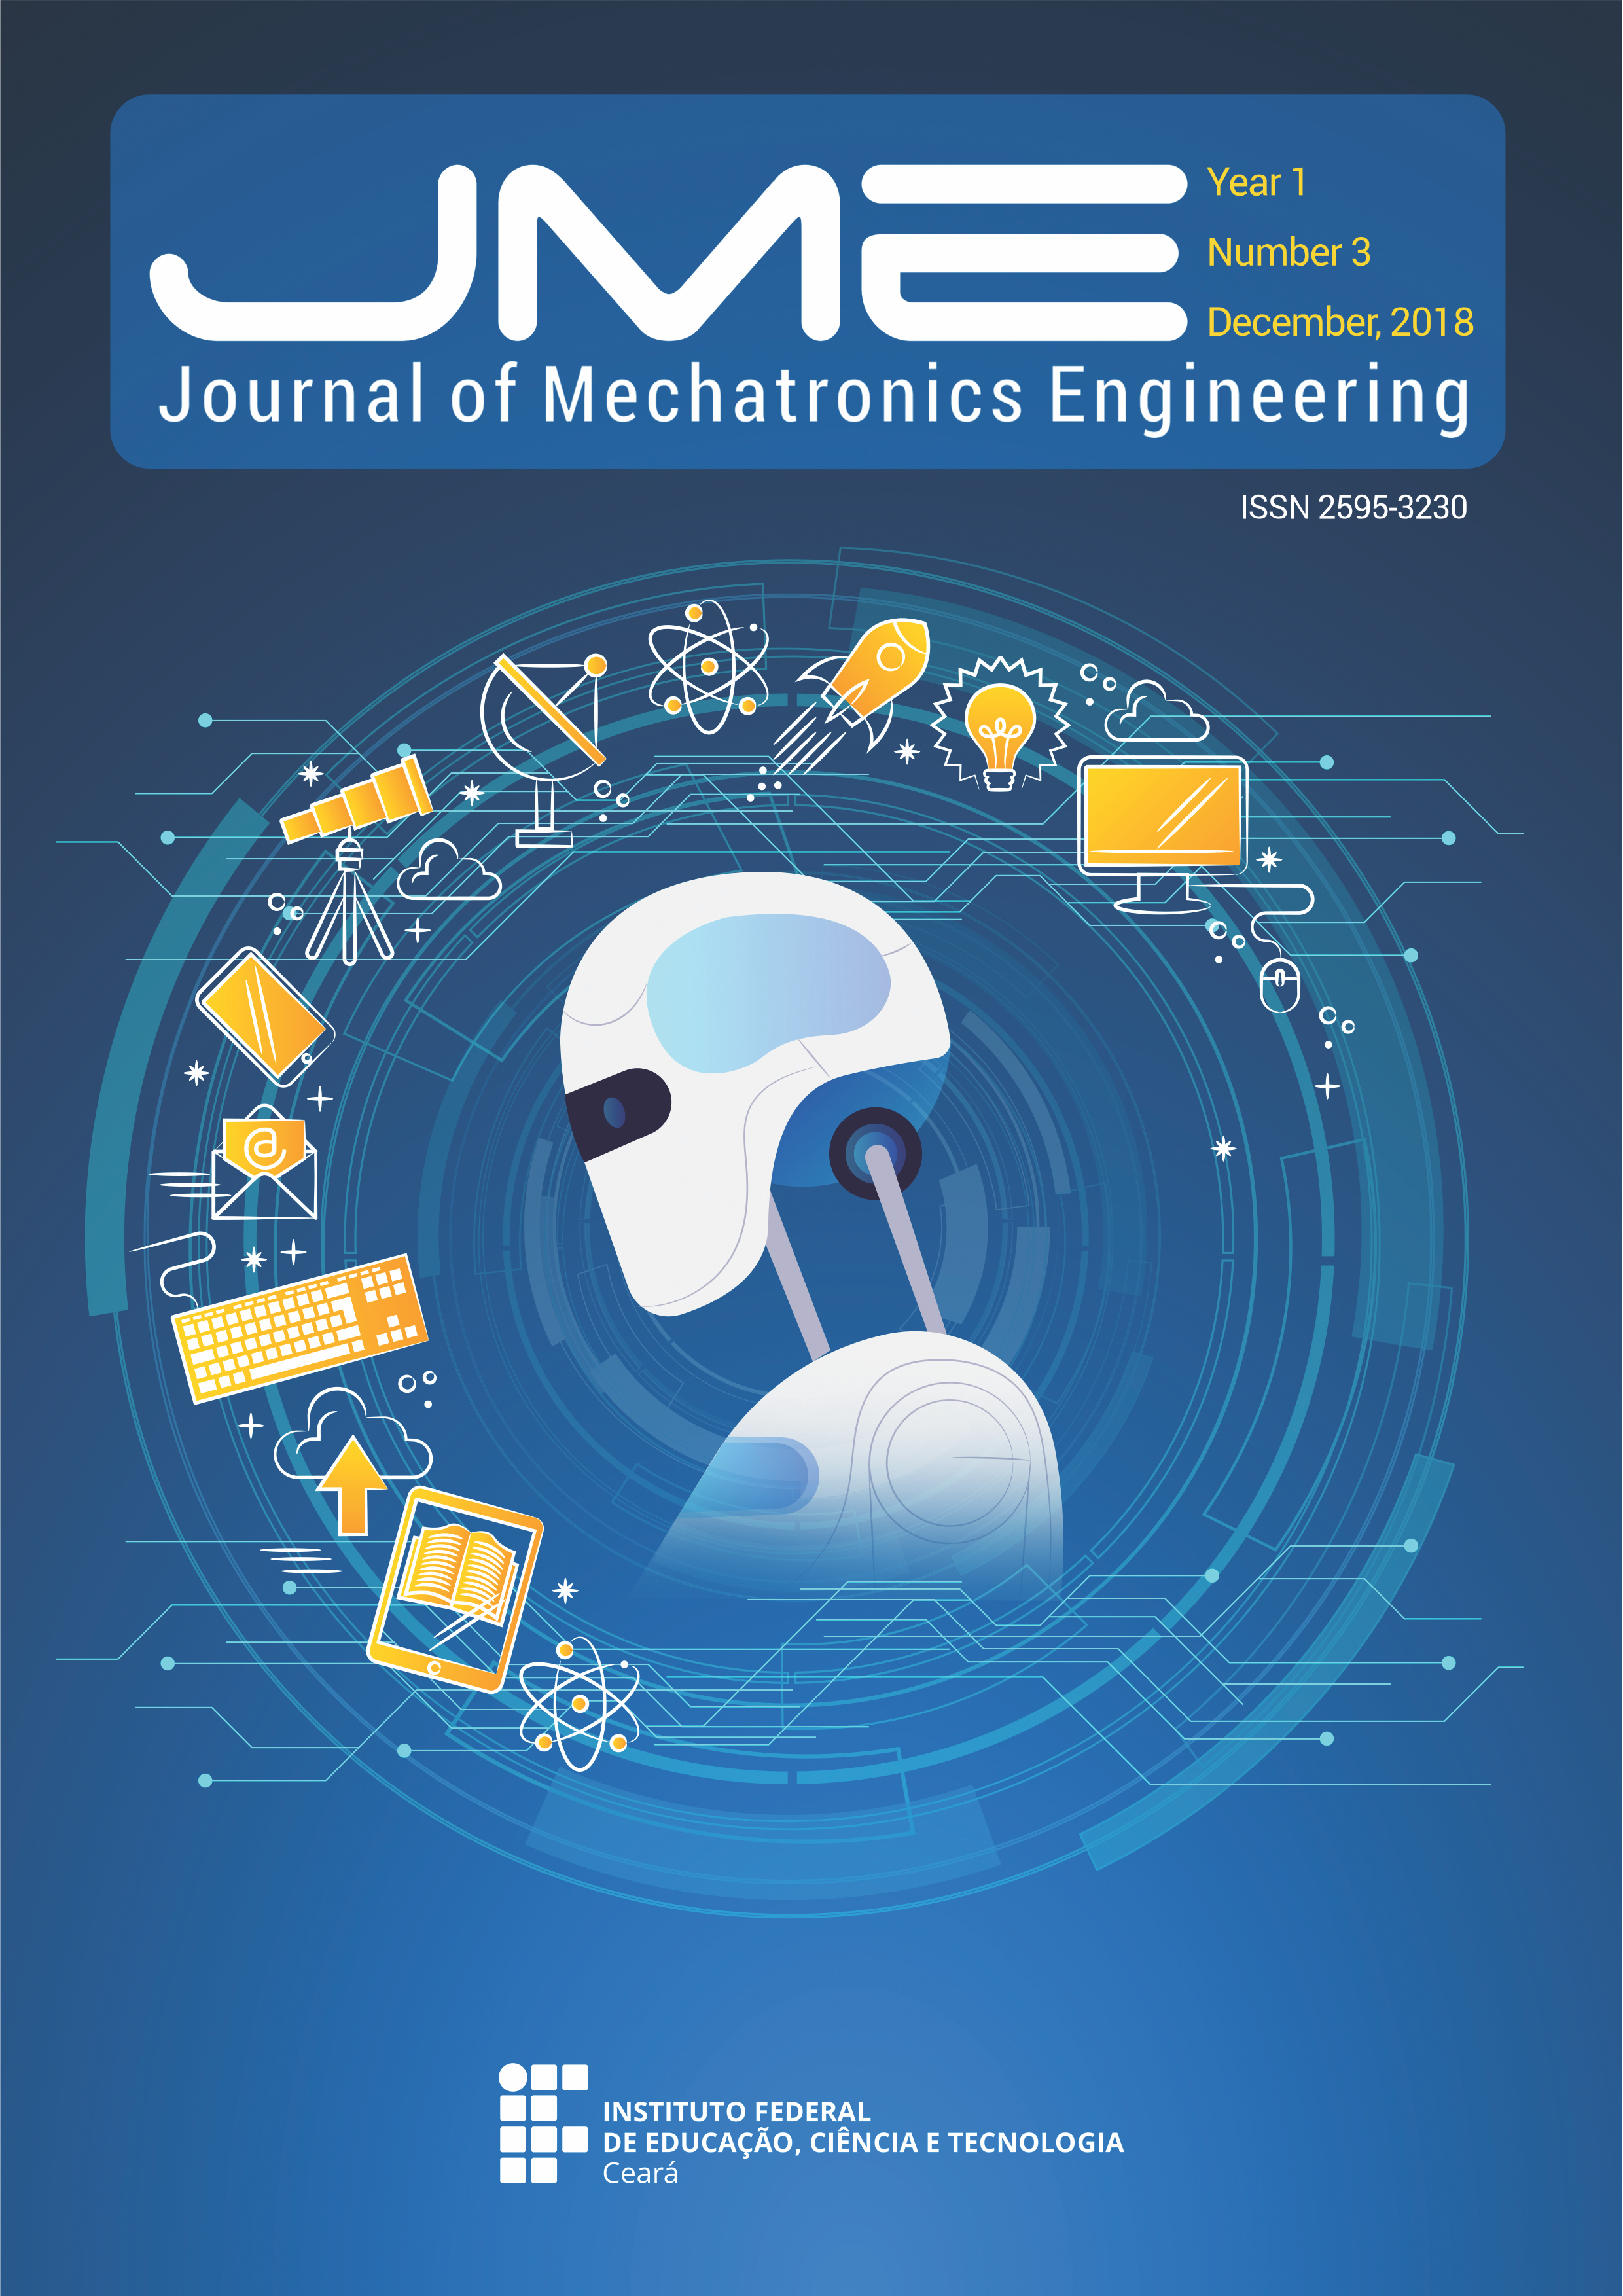 					View Vol. 1 No. 3 (2018): Journal of Mechatronics Engineering, v. 1, n. 3, Special Edition December, 2018
				